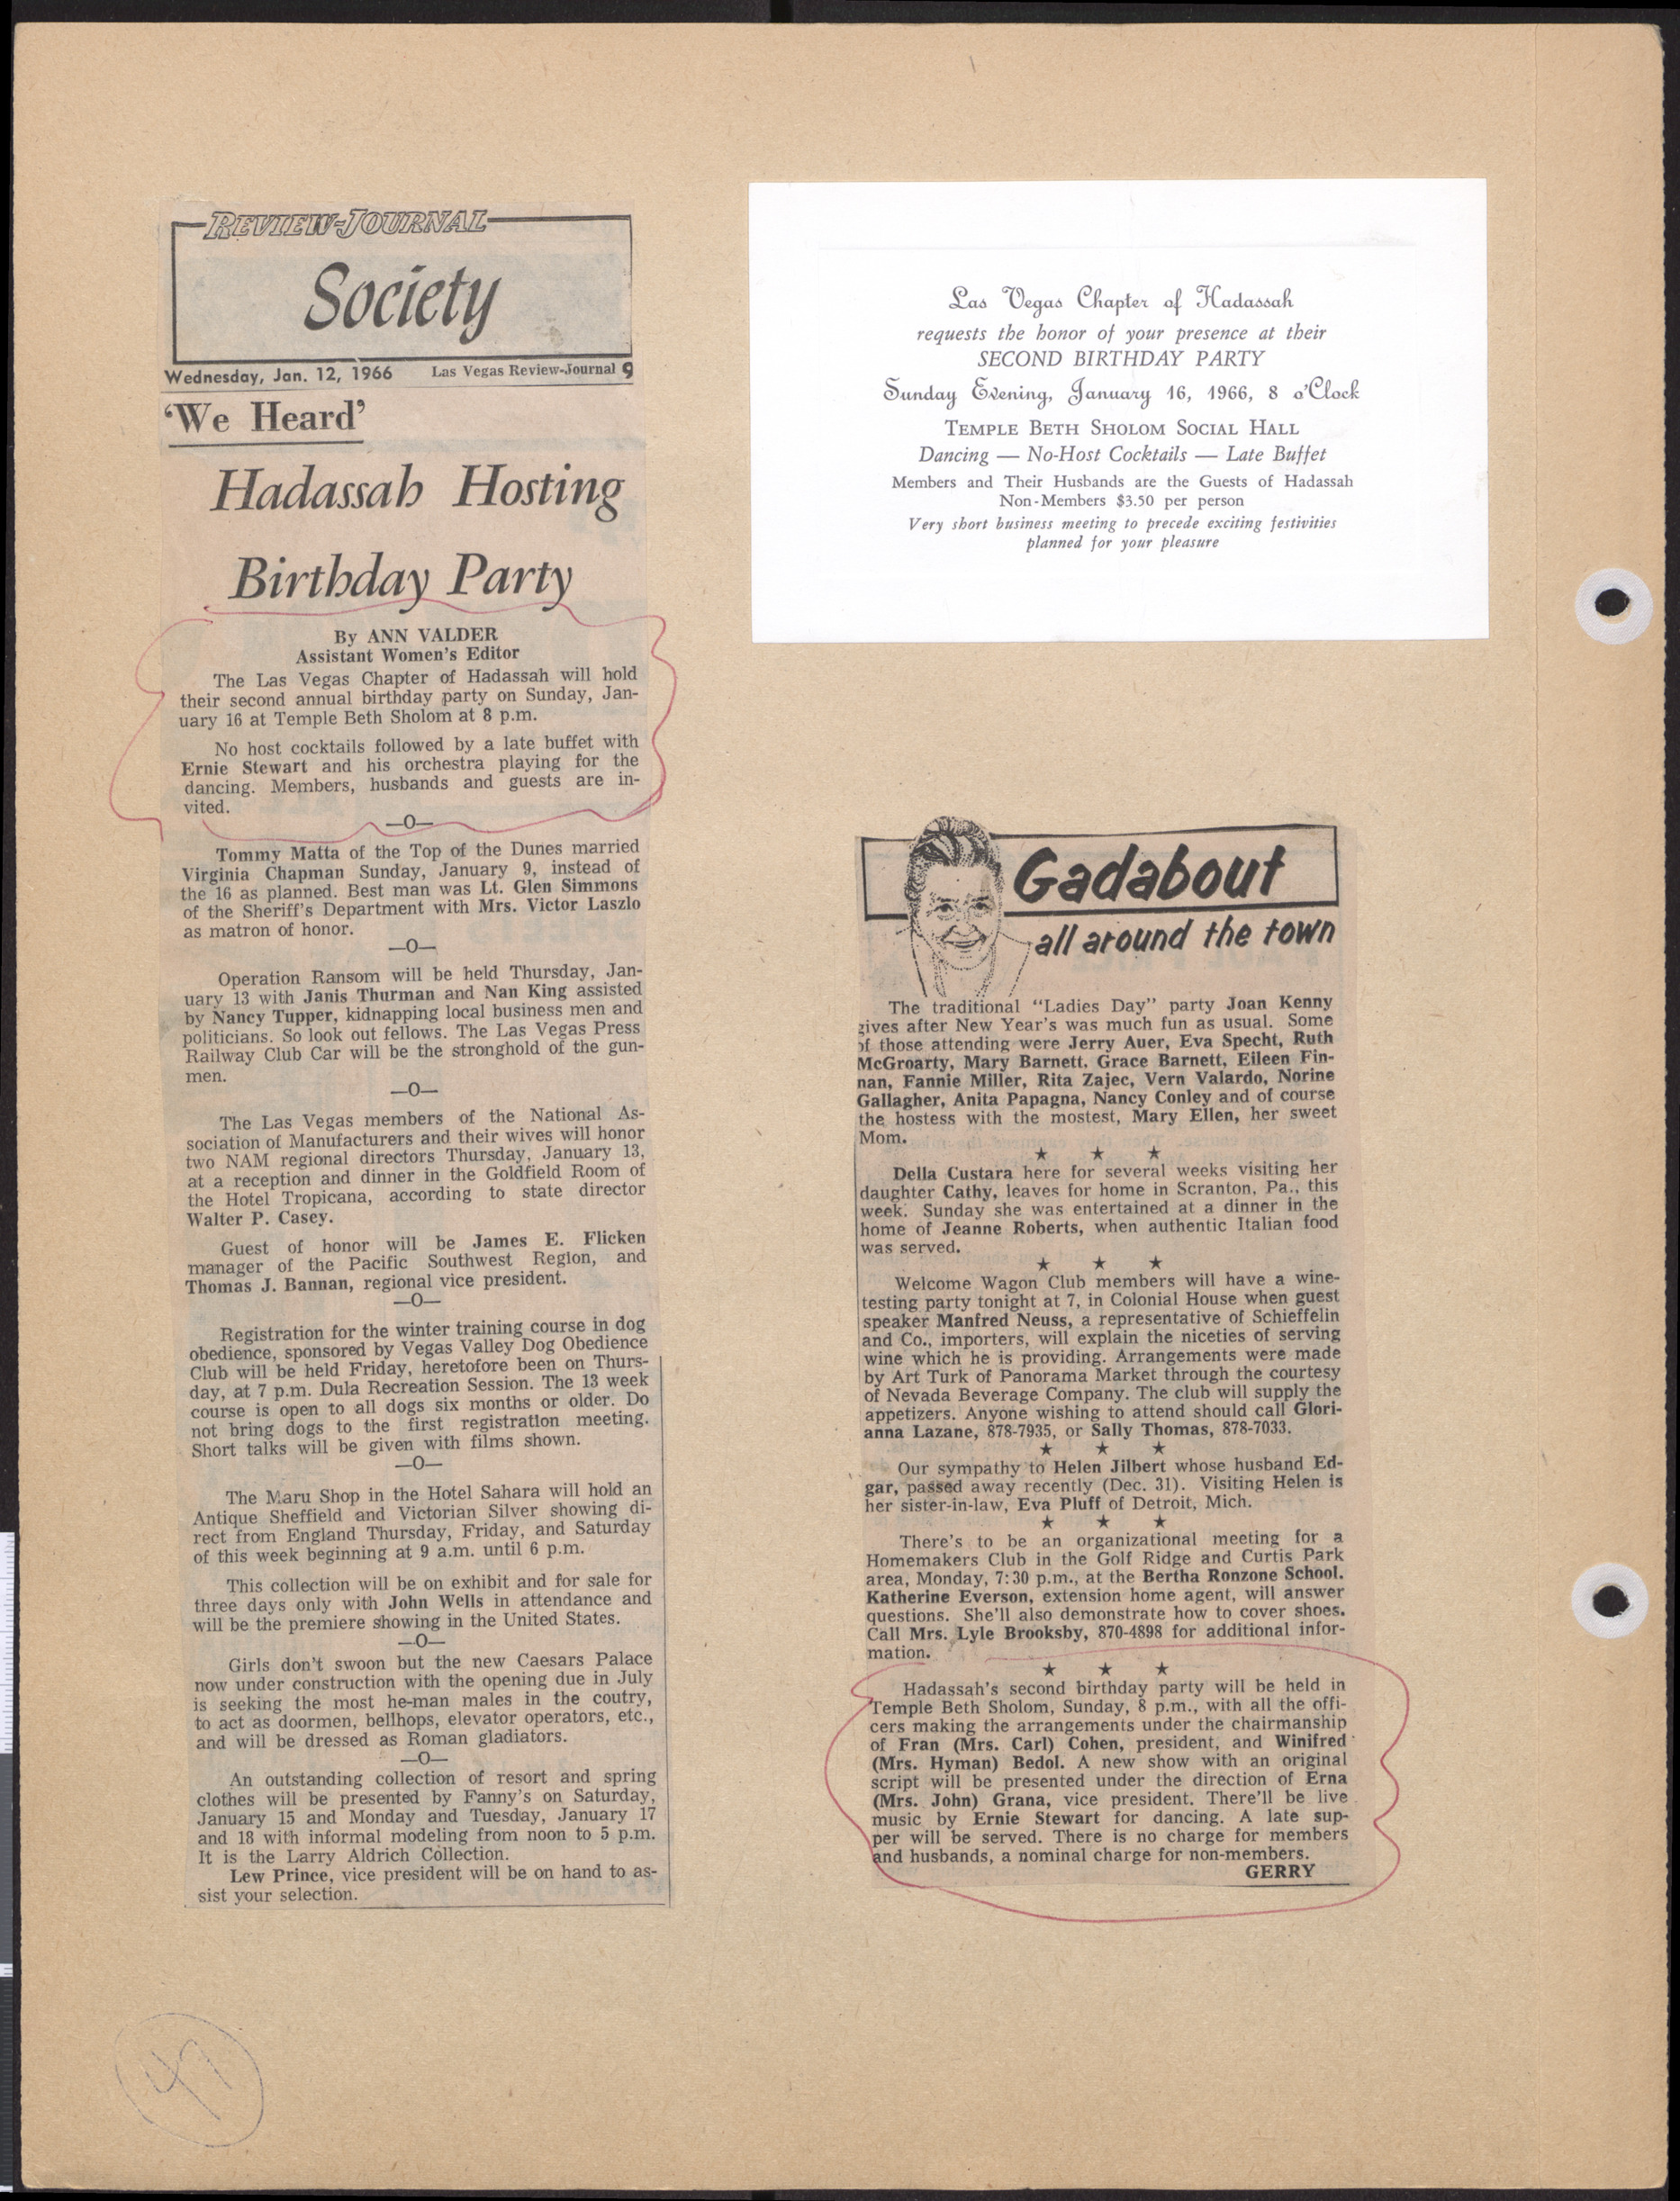 Newspaper clippings and invitation to Hadassah birthday party, January 1966